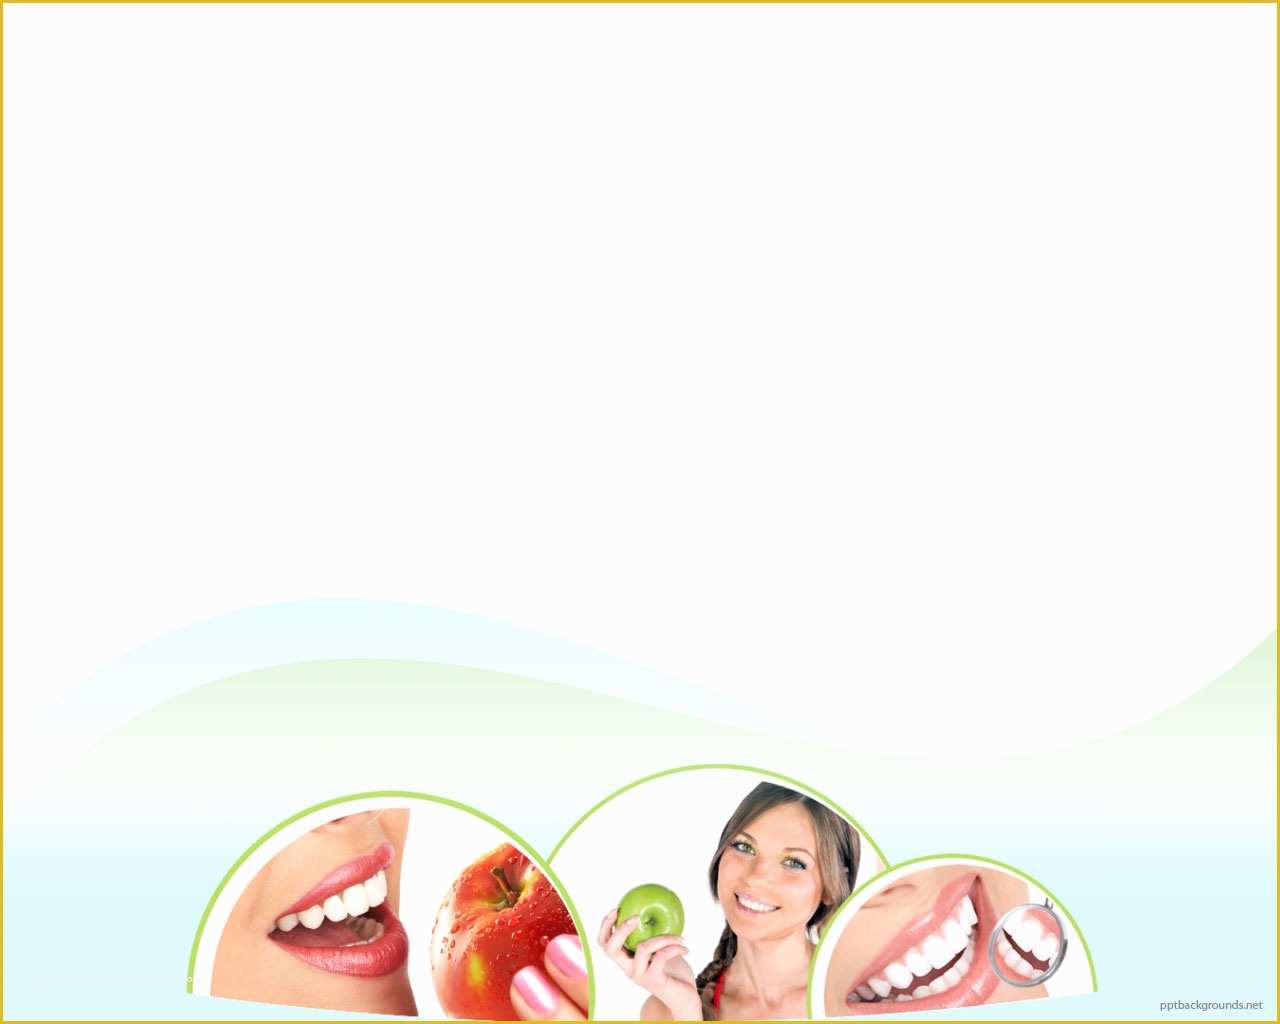 Free Animated Dental Powerpoint Templates Of oral and Dental Health Backgrounds for Powerpoint Health